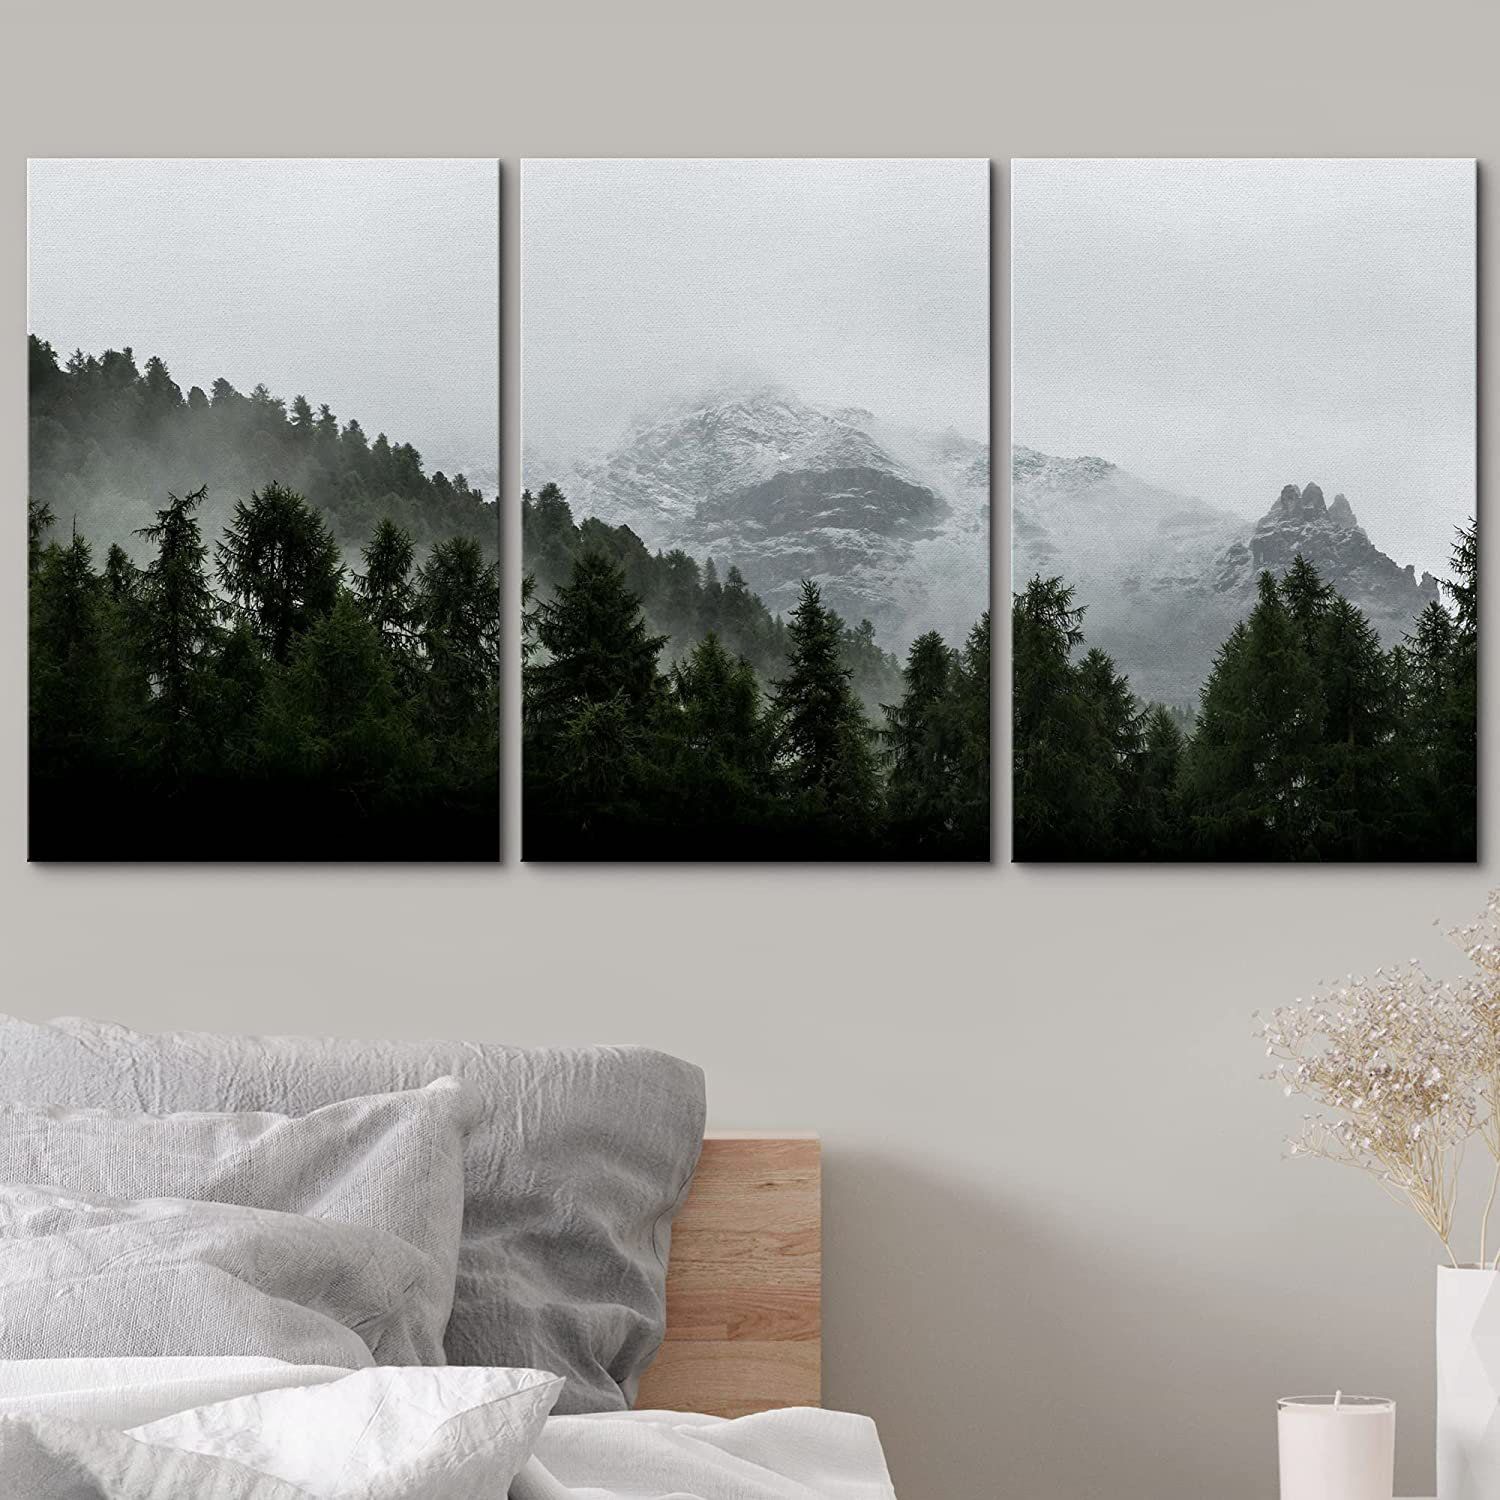 Idea4wall Landscape Of Mountain With Fog – 3 Piece Print On Canvas &  Reviews | Wayfair With Most Popular Mountains In The Fog Wall Art (View 1 of 20)